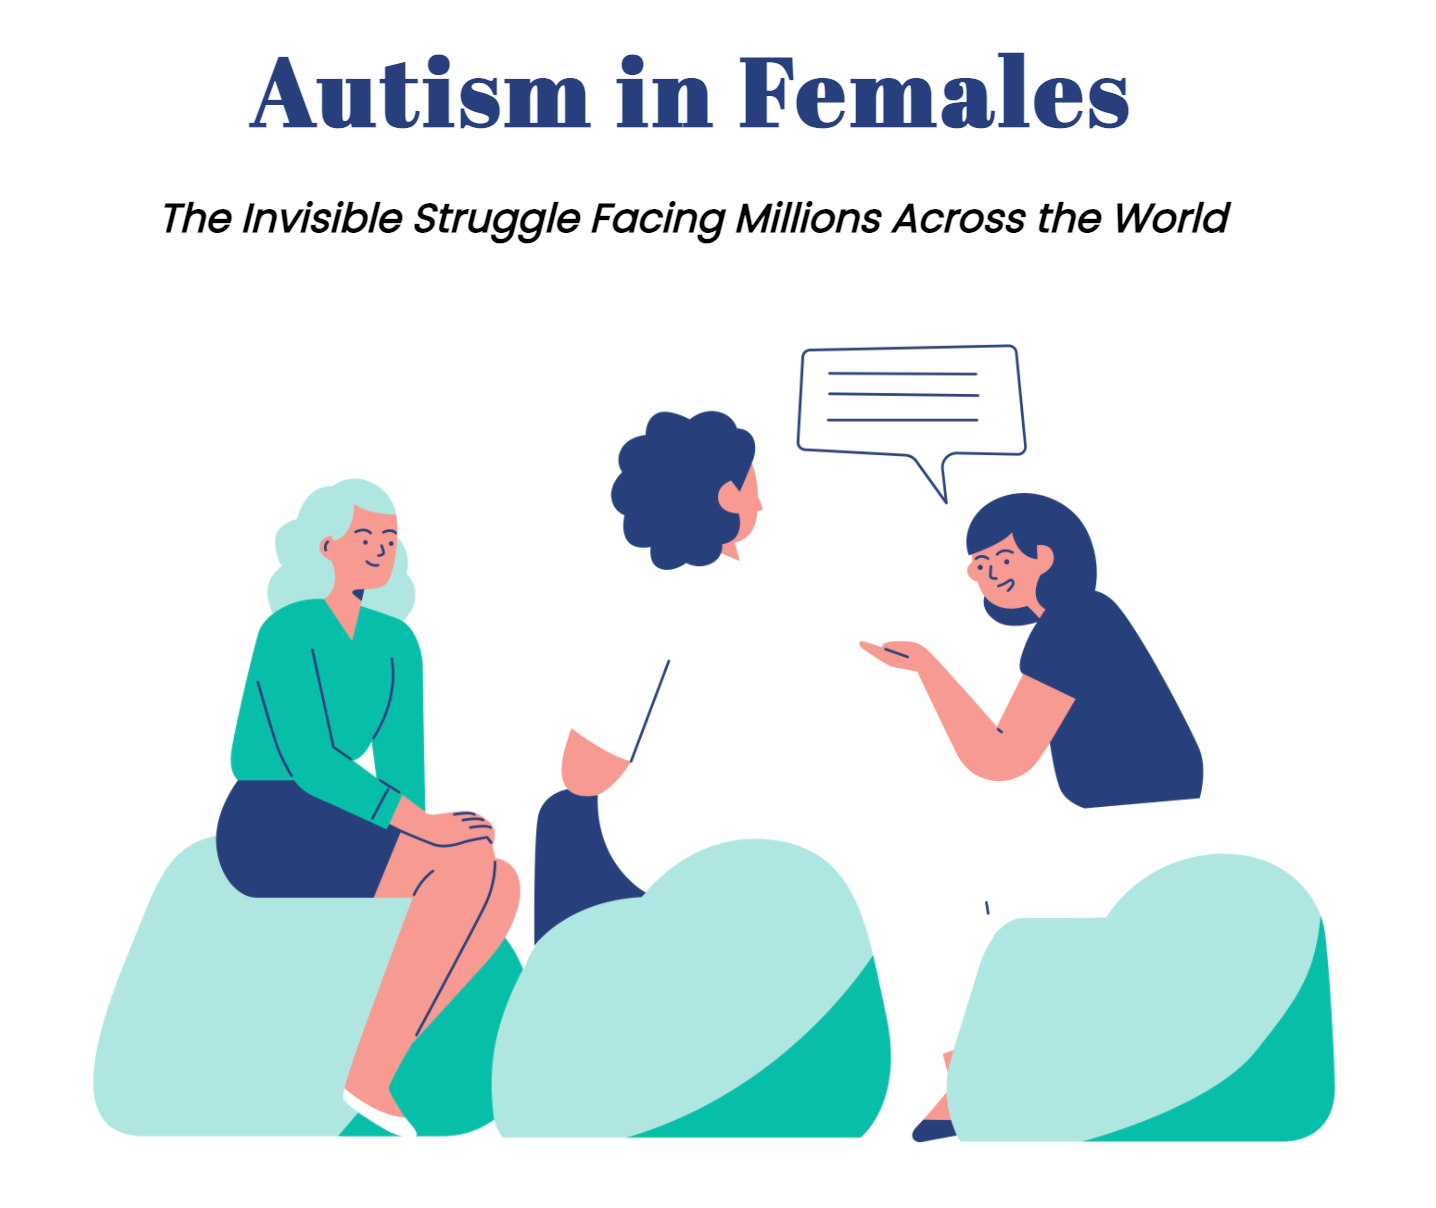 Autism in Females, Website by Taylor Heaton